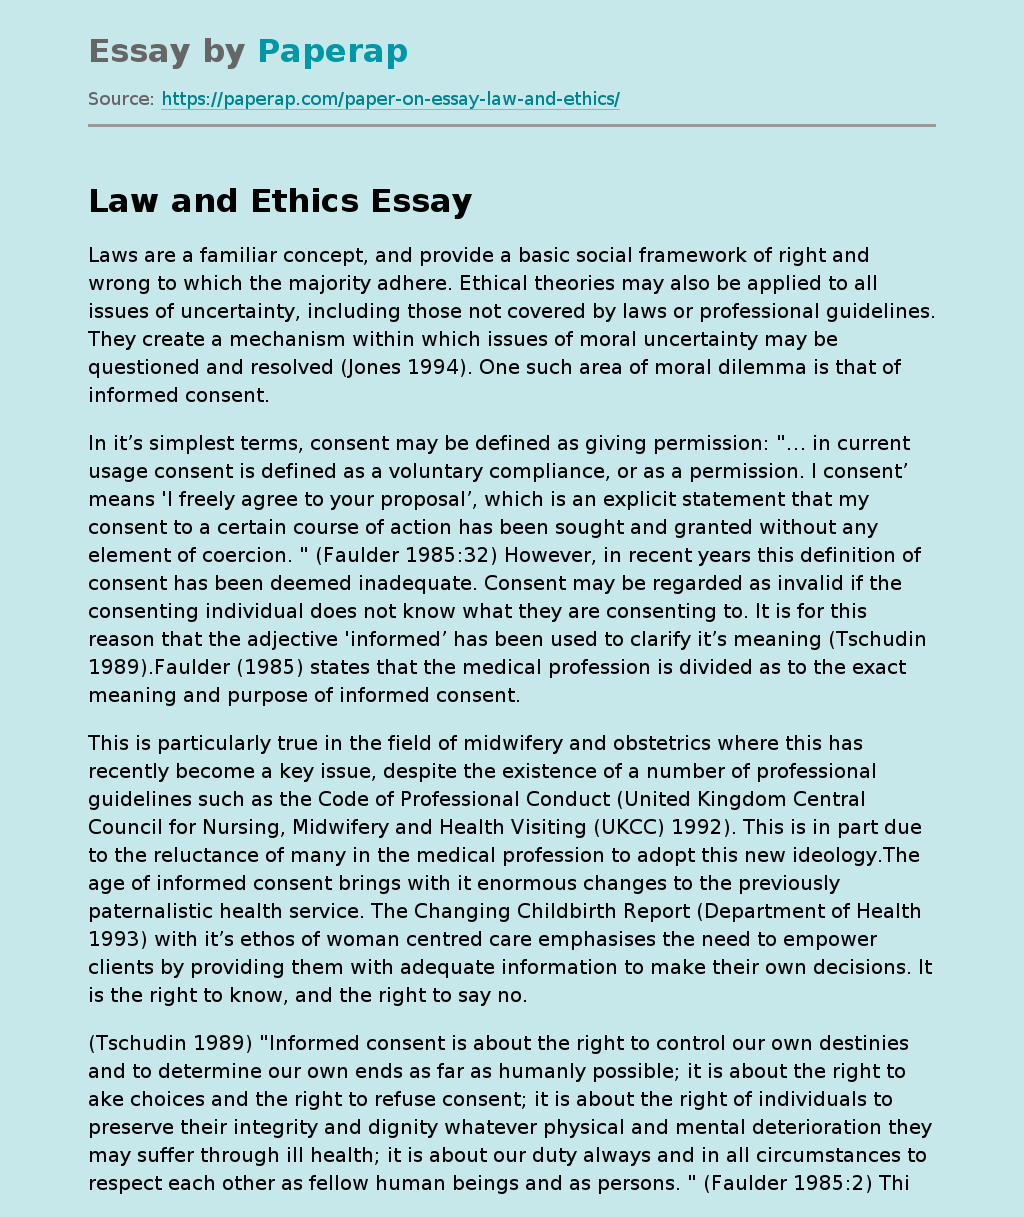 Laws and Ethics